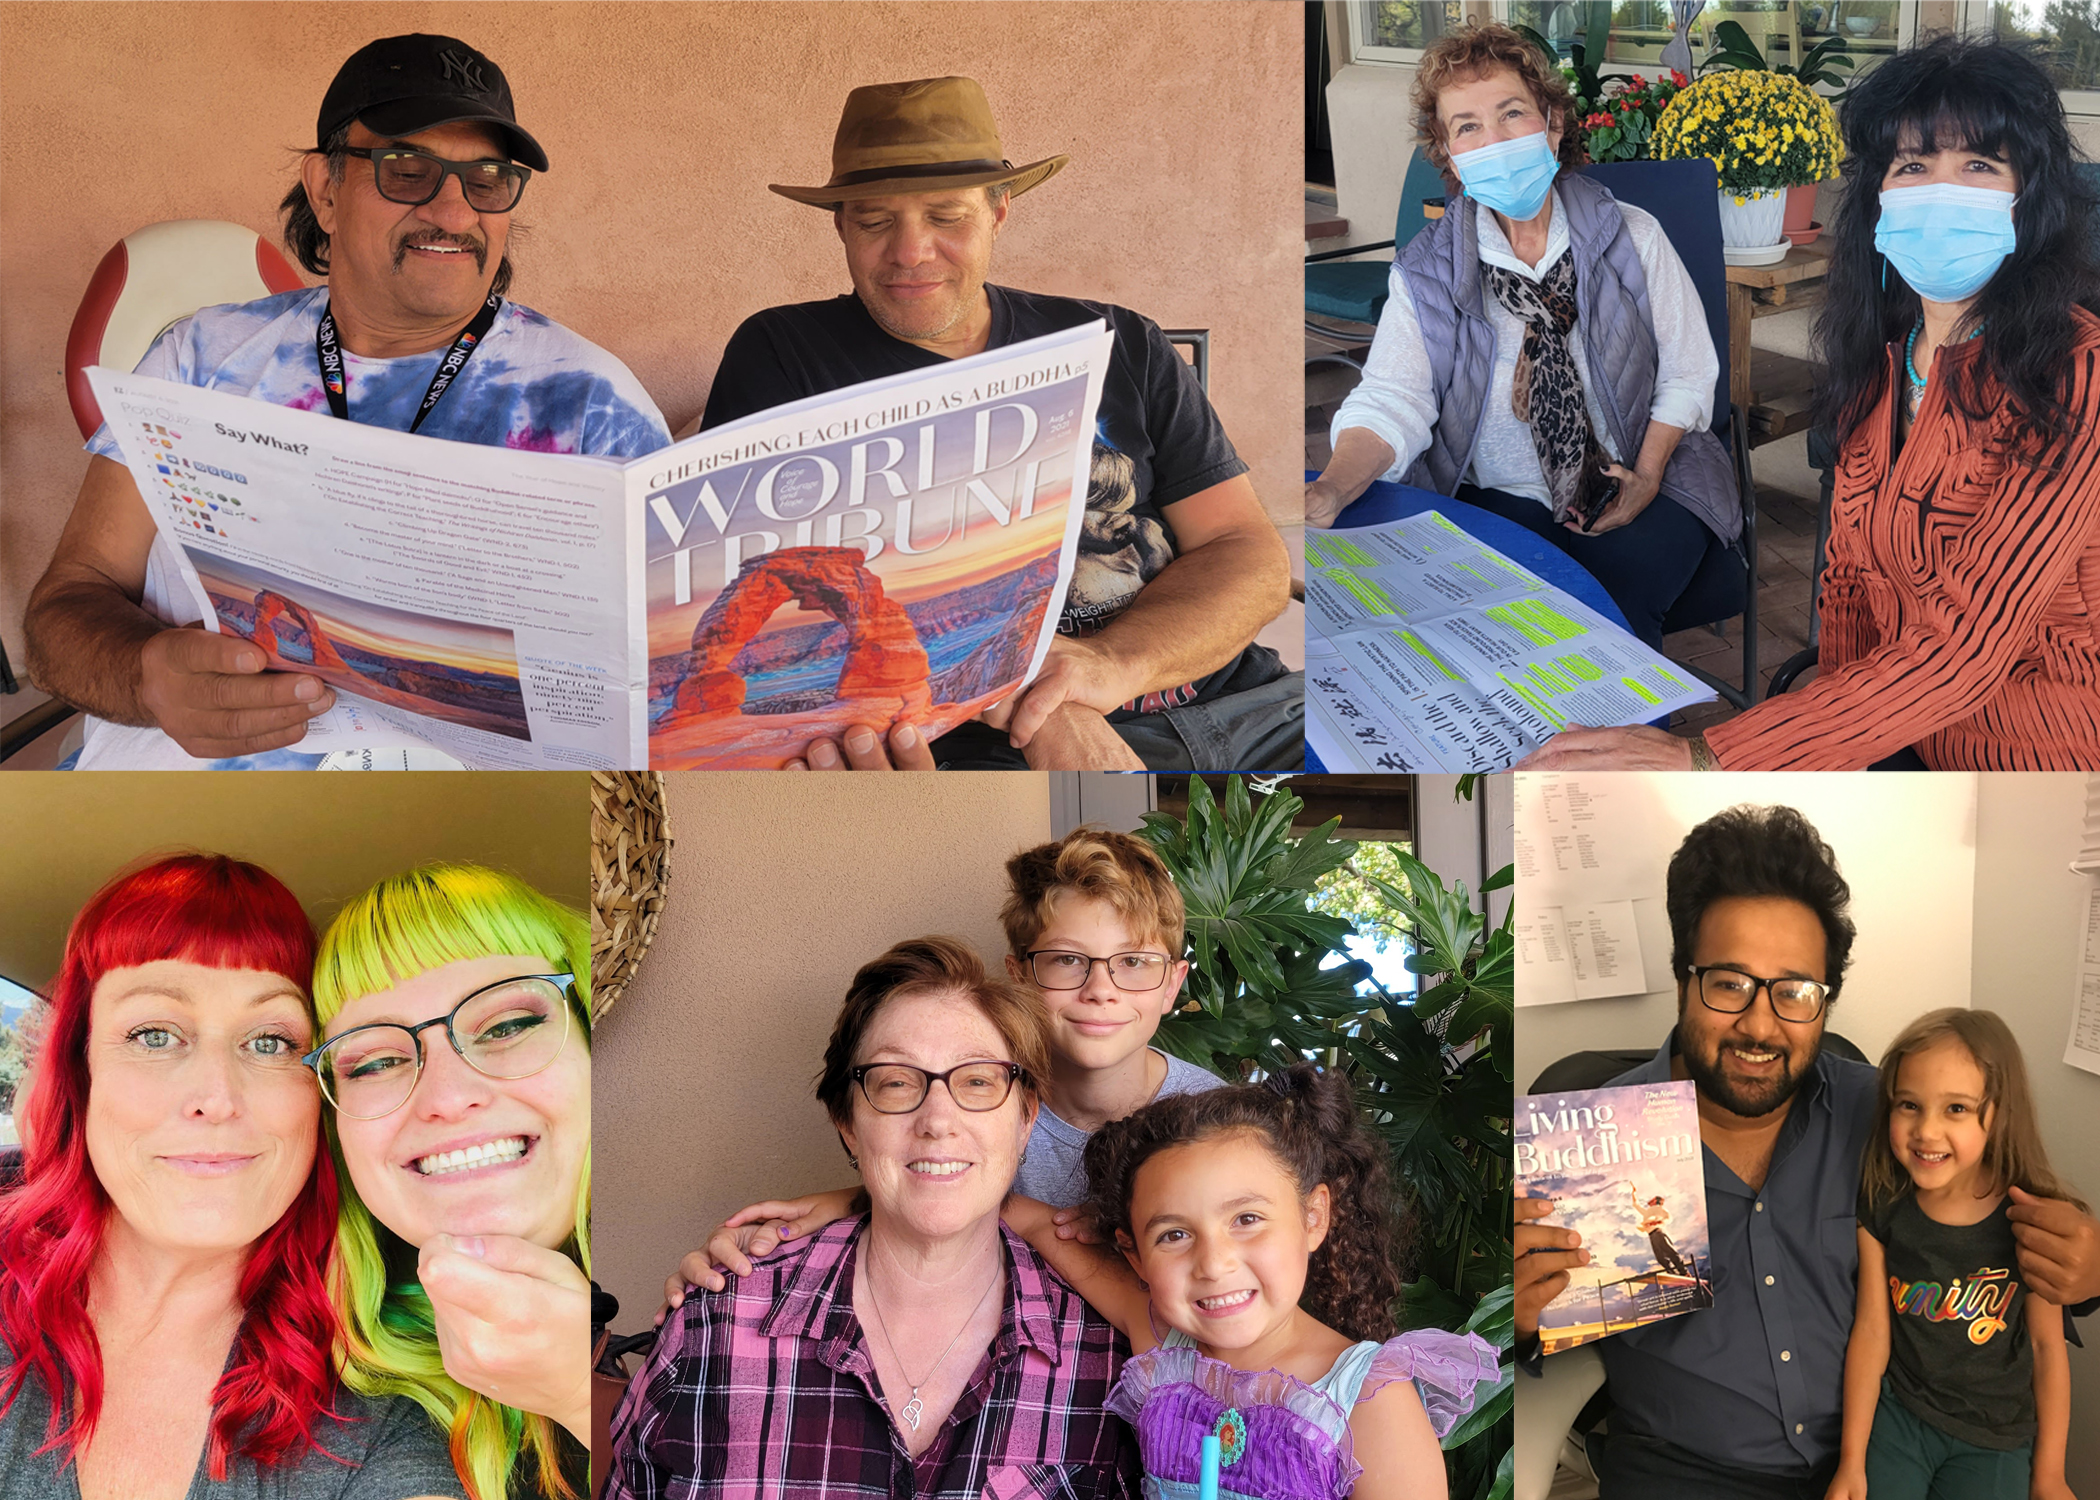 Unity—SGI-USA members and their families in Northern New Mexico Chapter unite in prayer and action—encouraging one another and studying SGI-USA publications together.